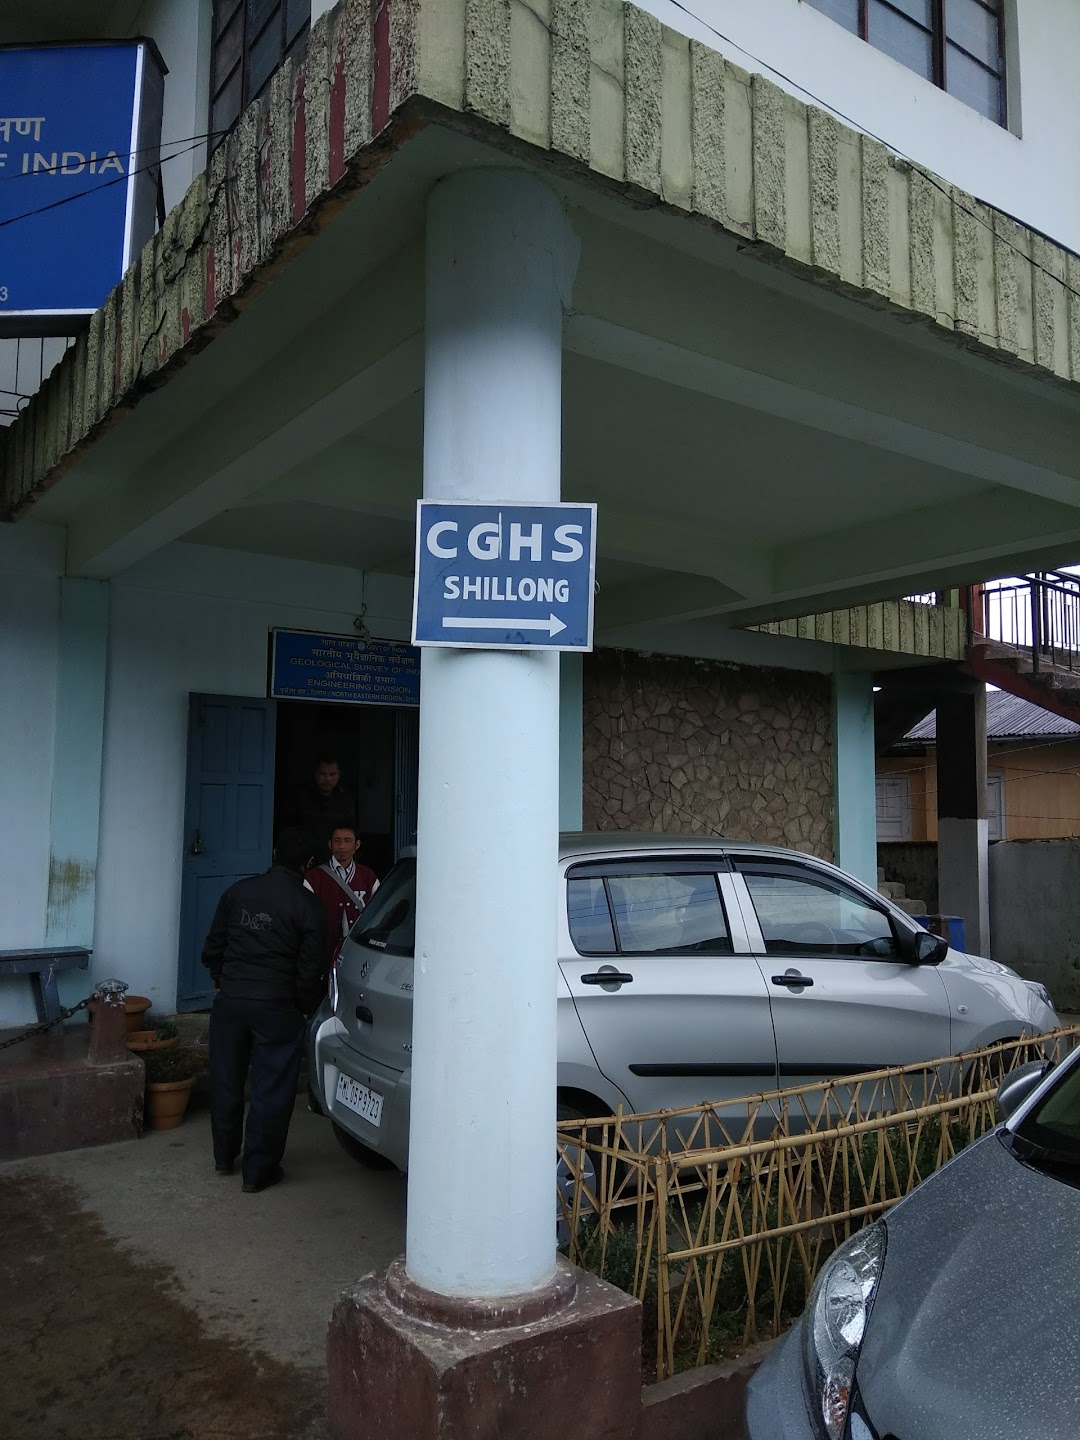 CGHS Shillong Head Office.